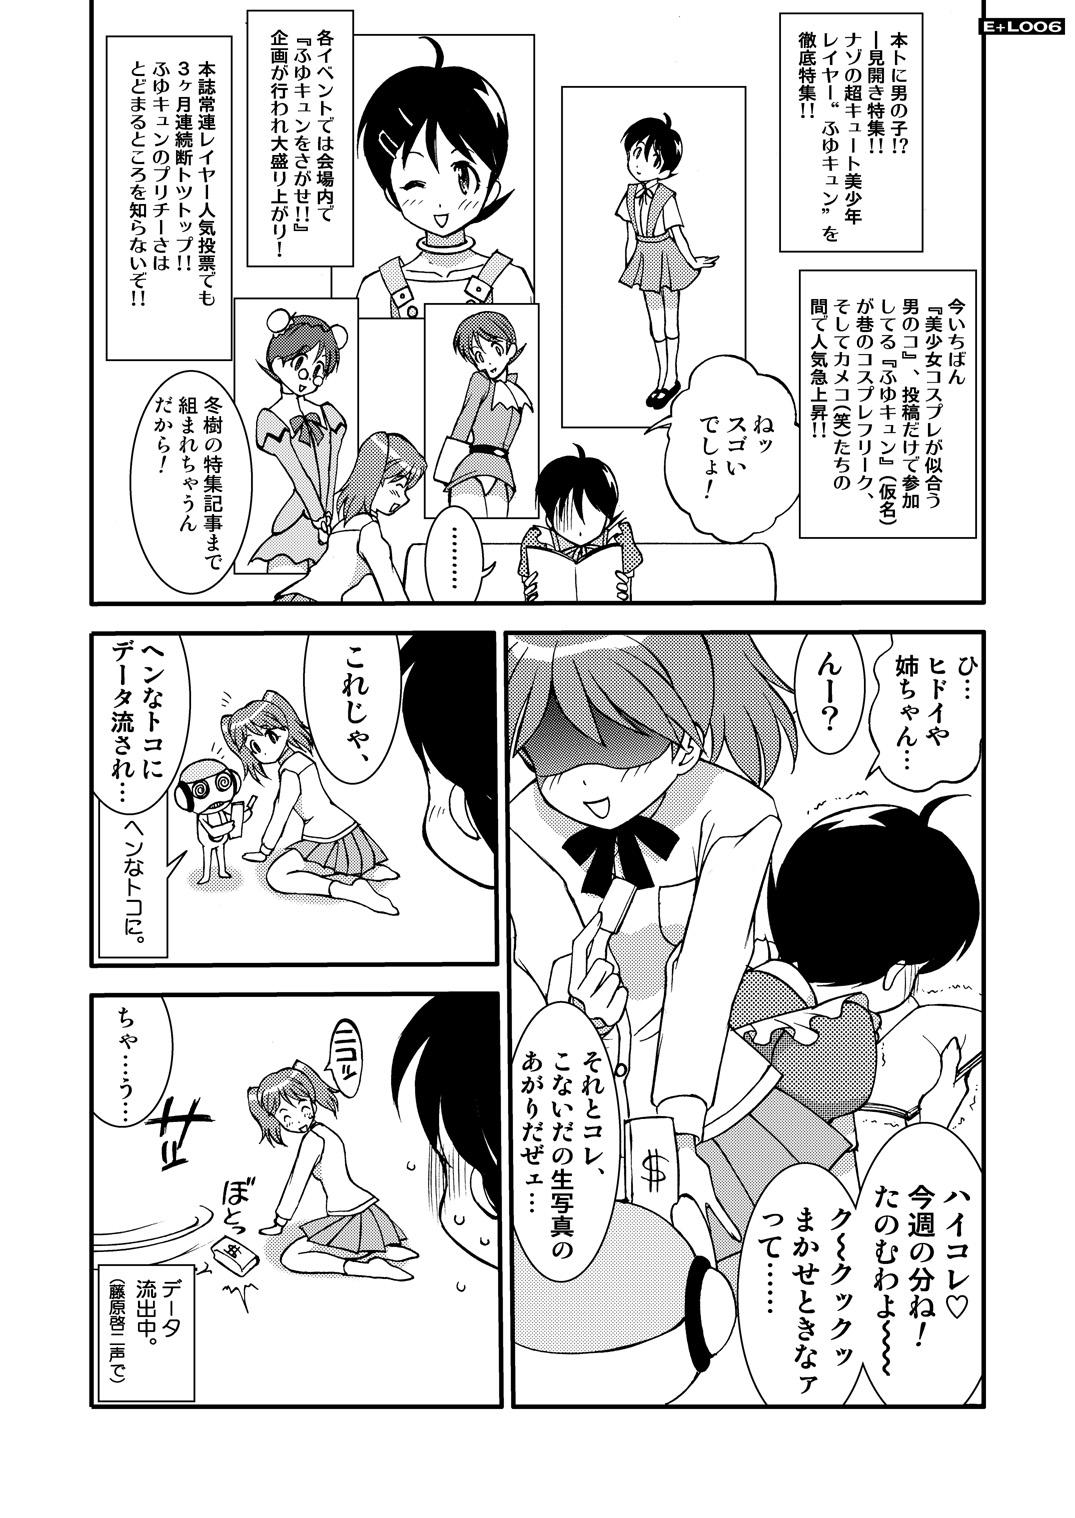 3some Energetic Love - Keroro gunsou Gay Trimmed - Page 5